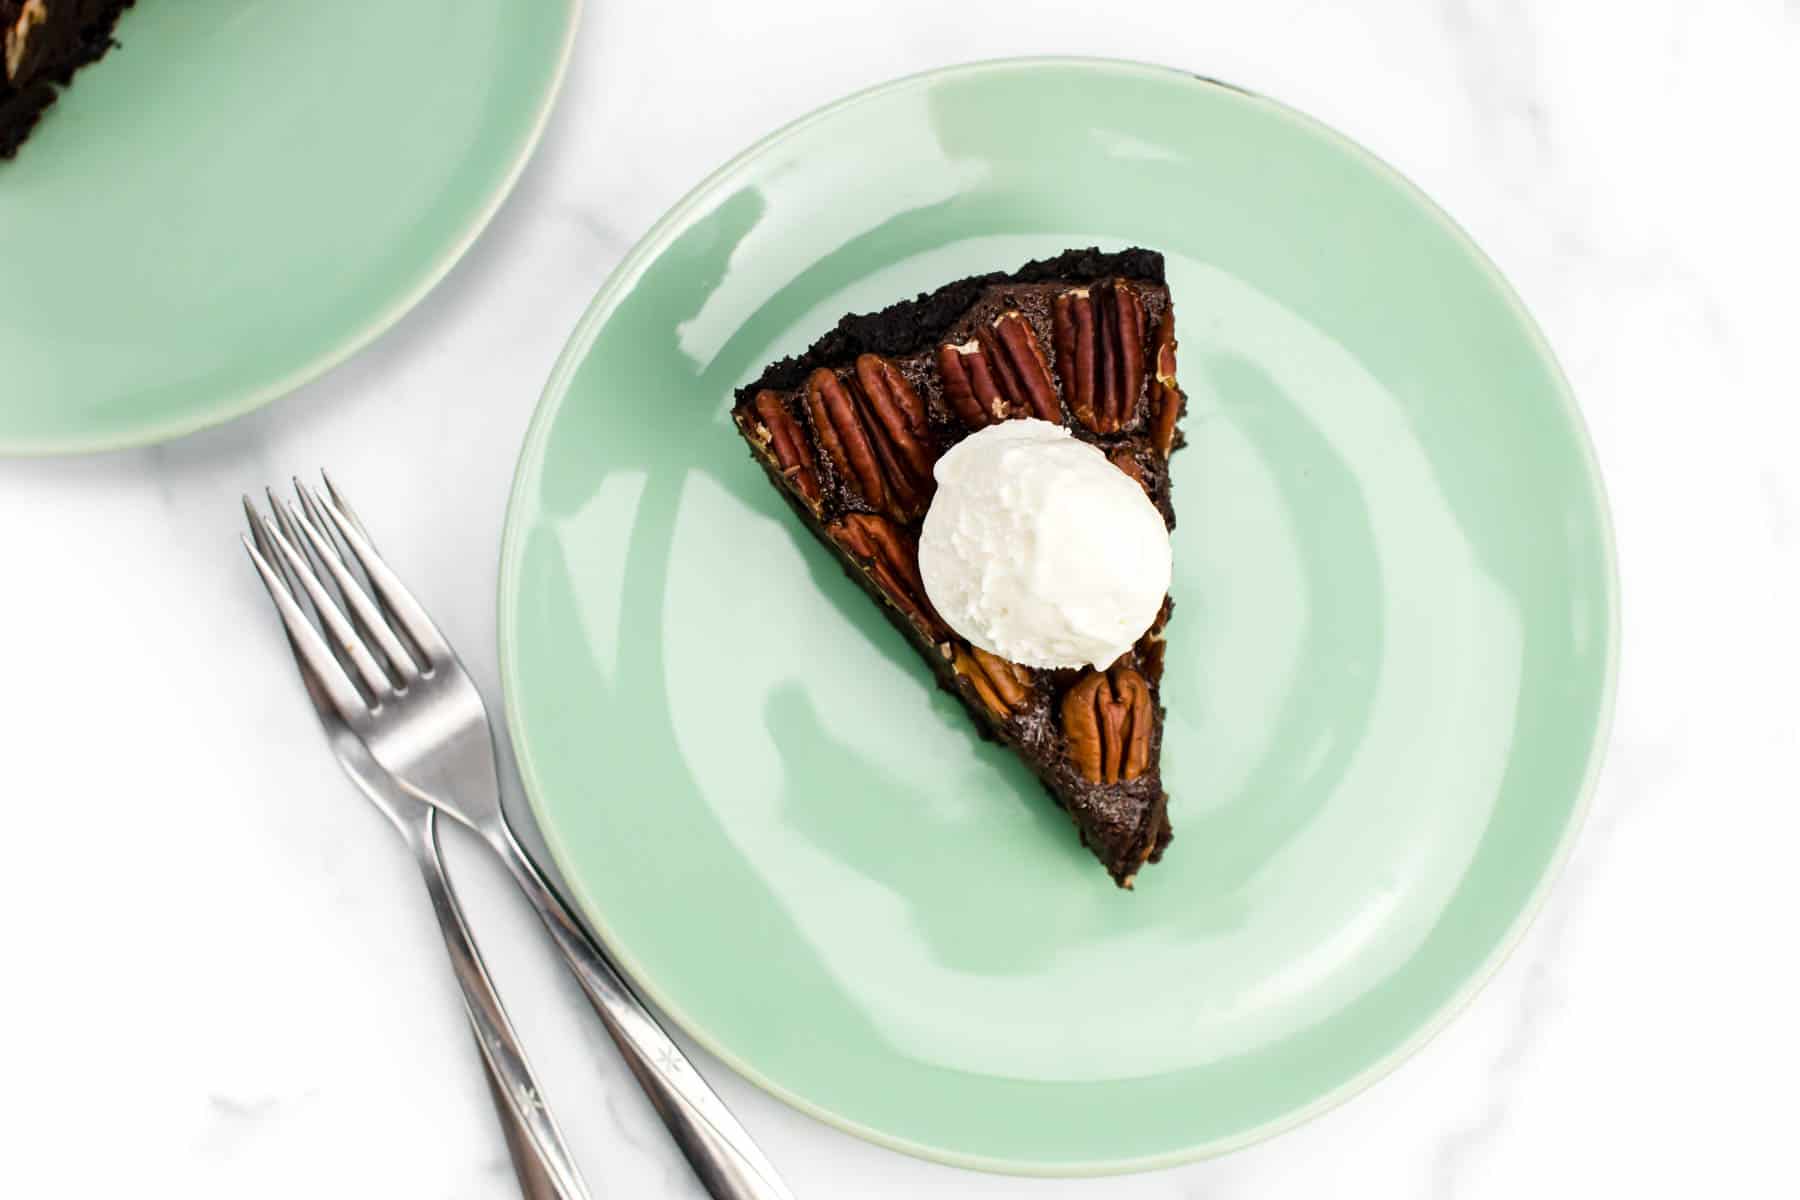 A chocolate pie with nuts on top and a scoop of ice cream on a light green plate with two forks.